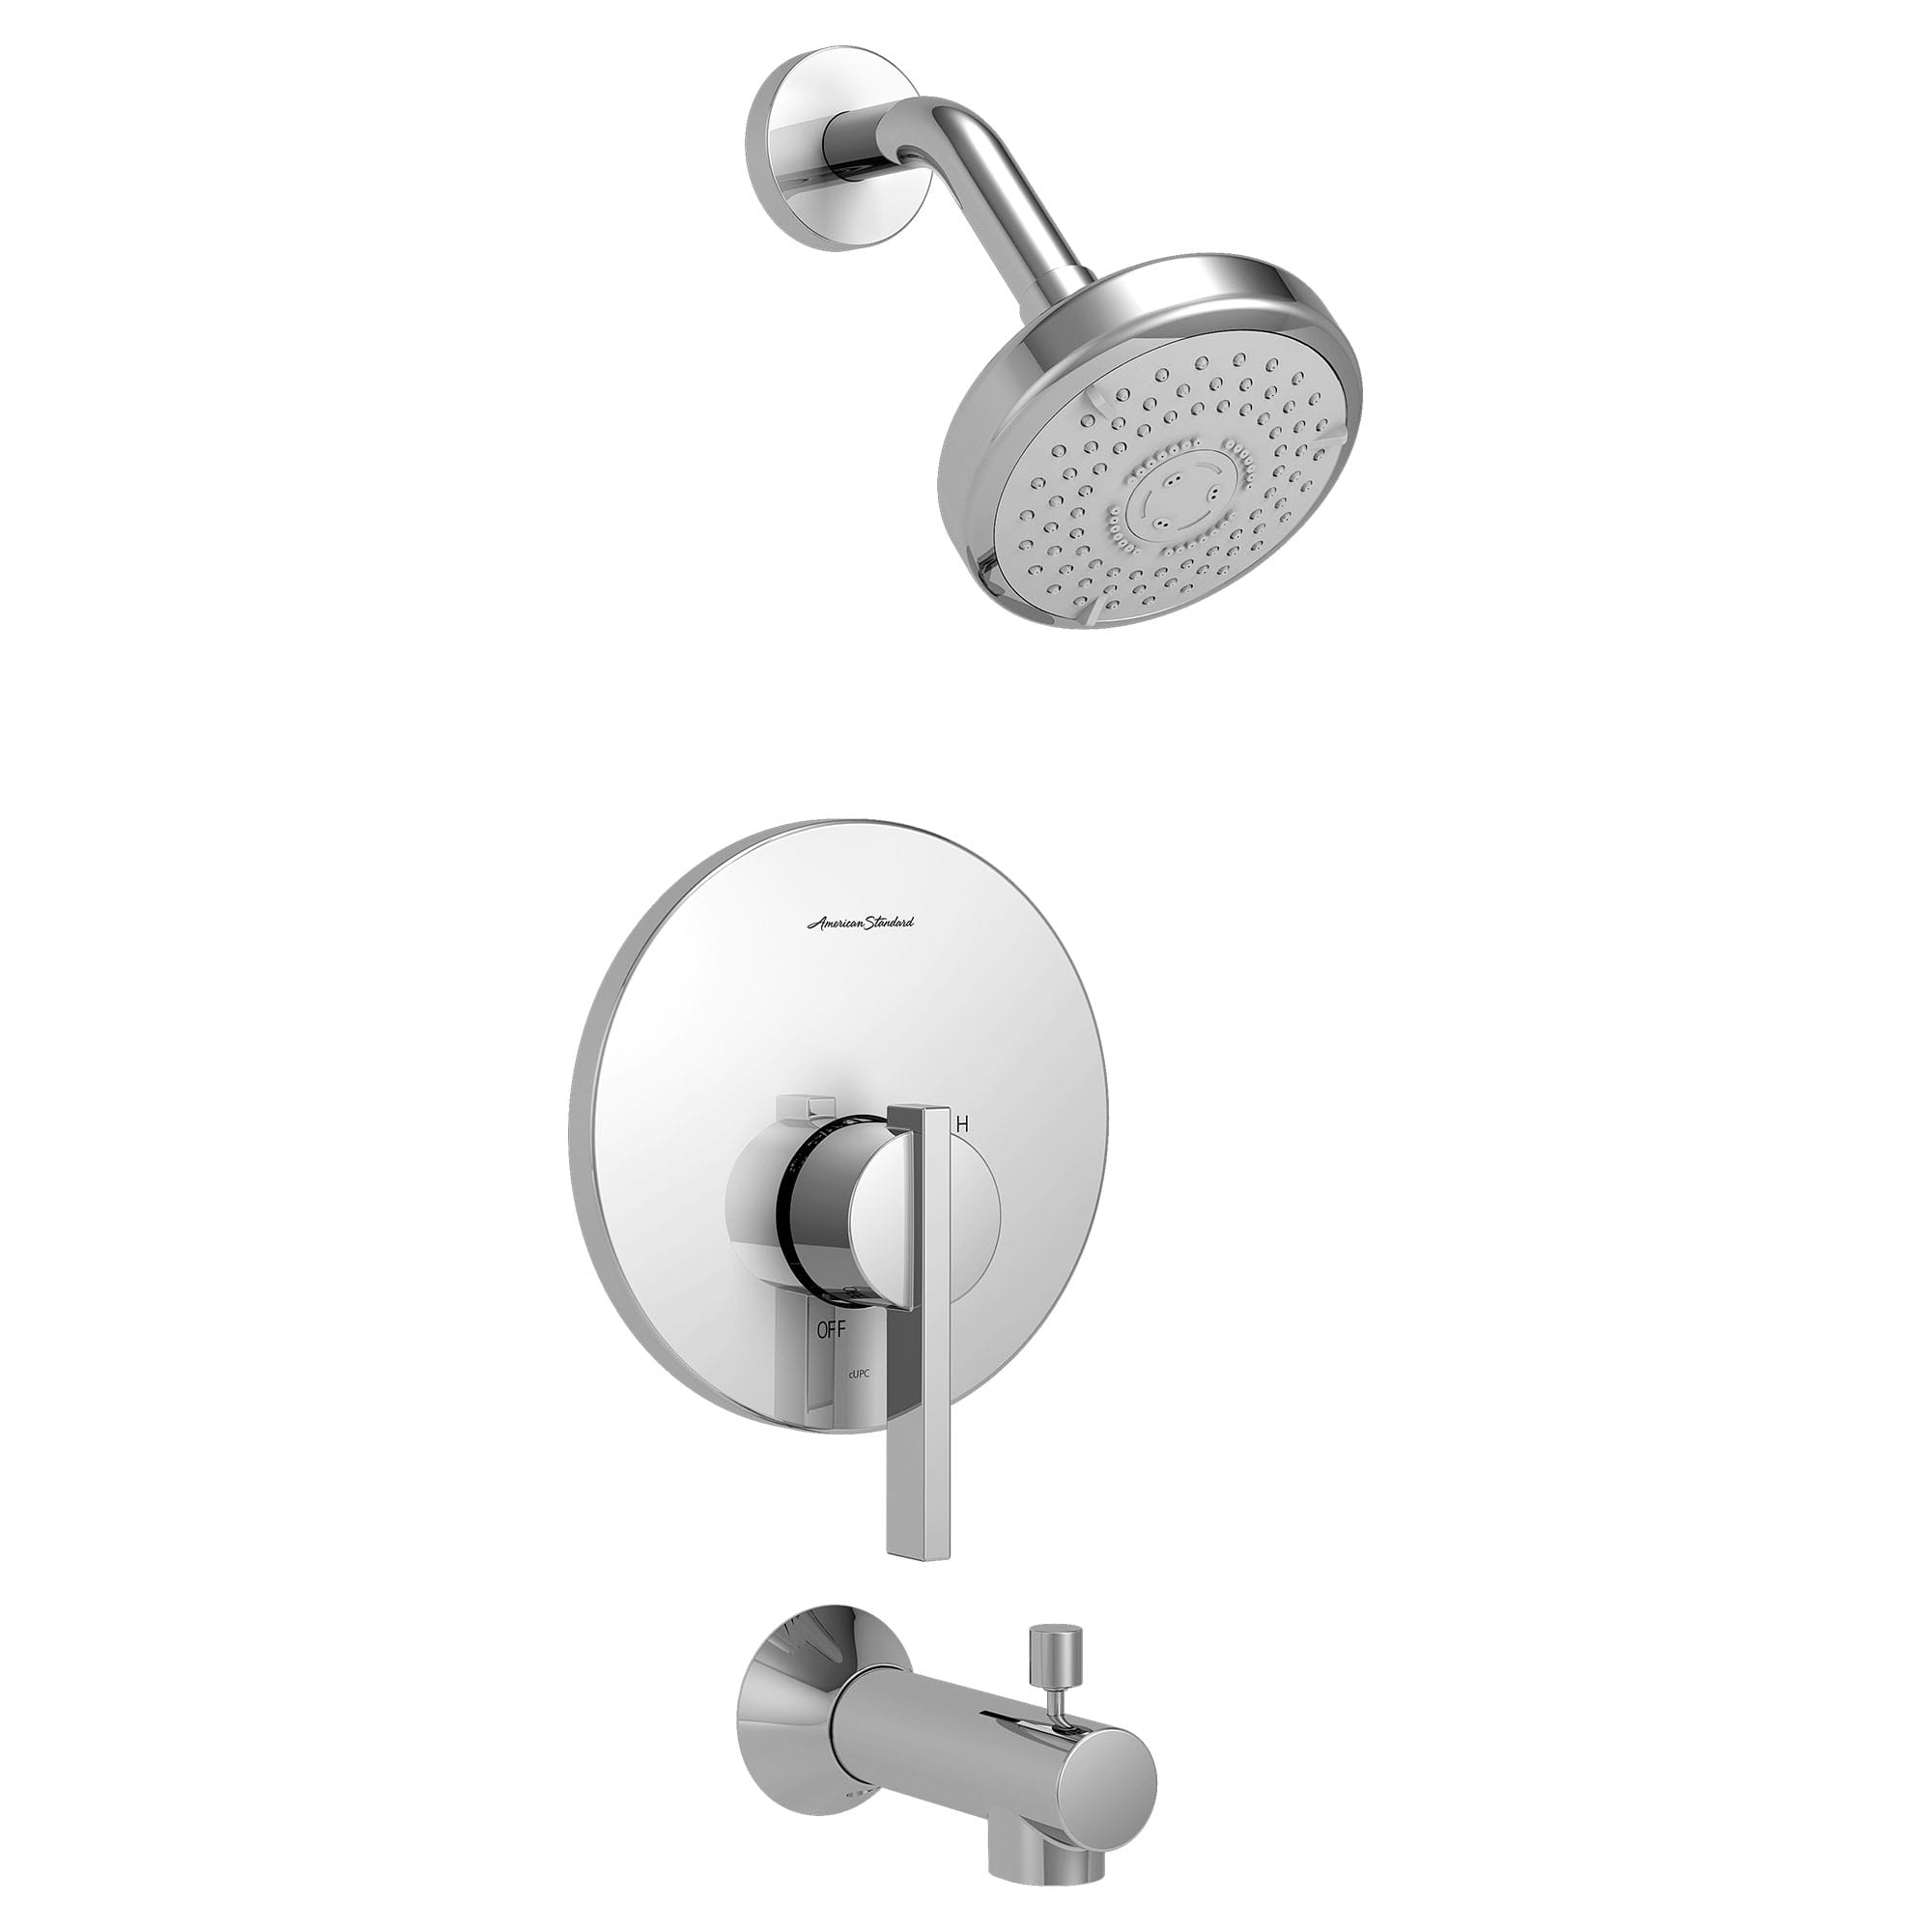 Berwick 175 gpm 66 L min Tub and Shower Trim Kit With 3 Function Showerhead Double Ceramic Pressure Balance Cartridge and Lever Handle CHROME